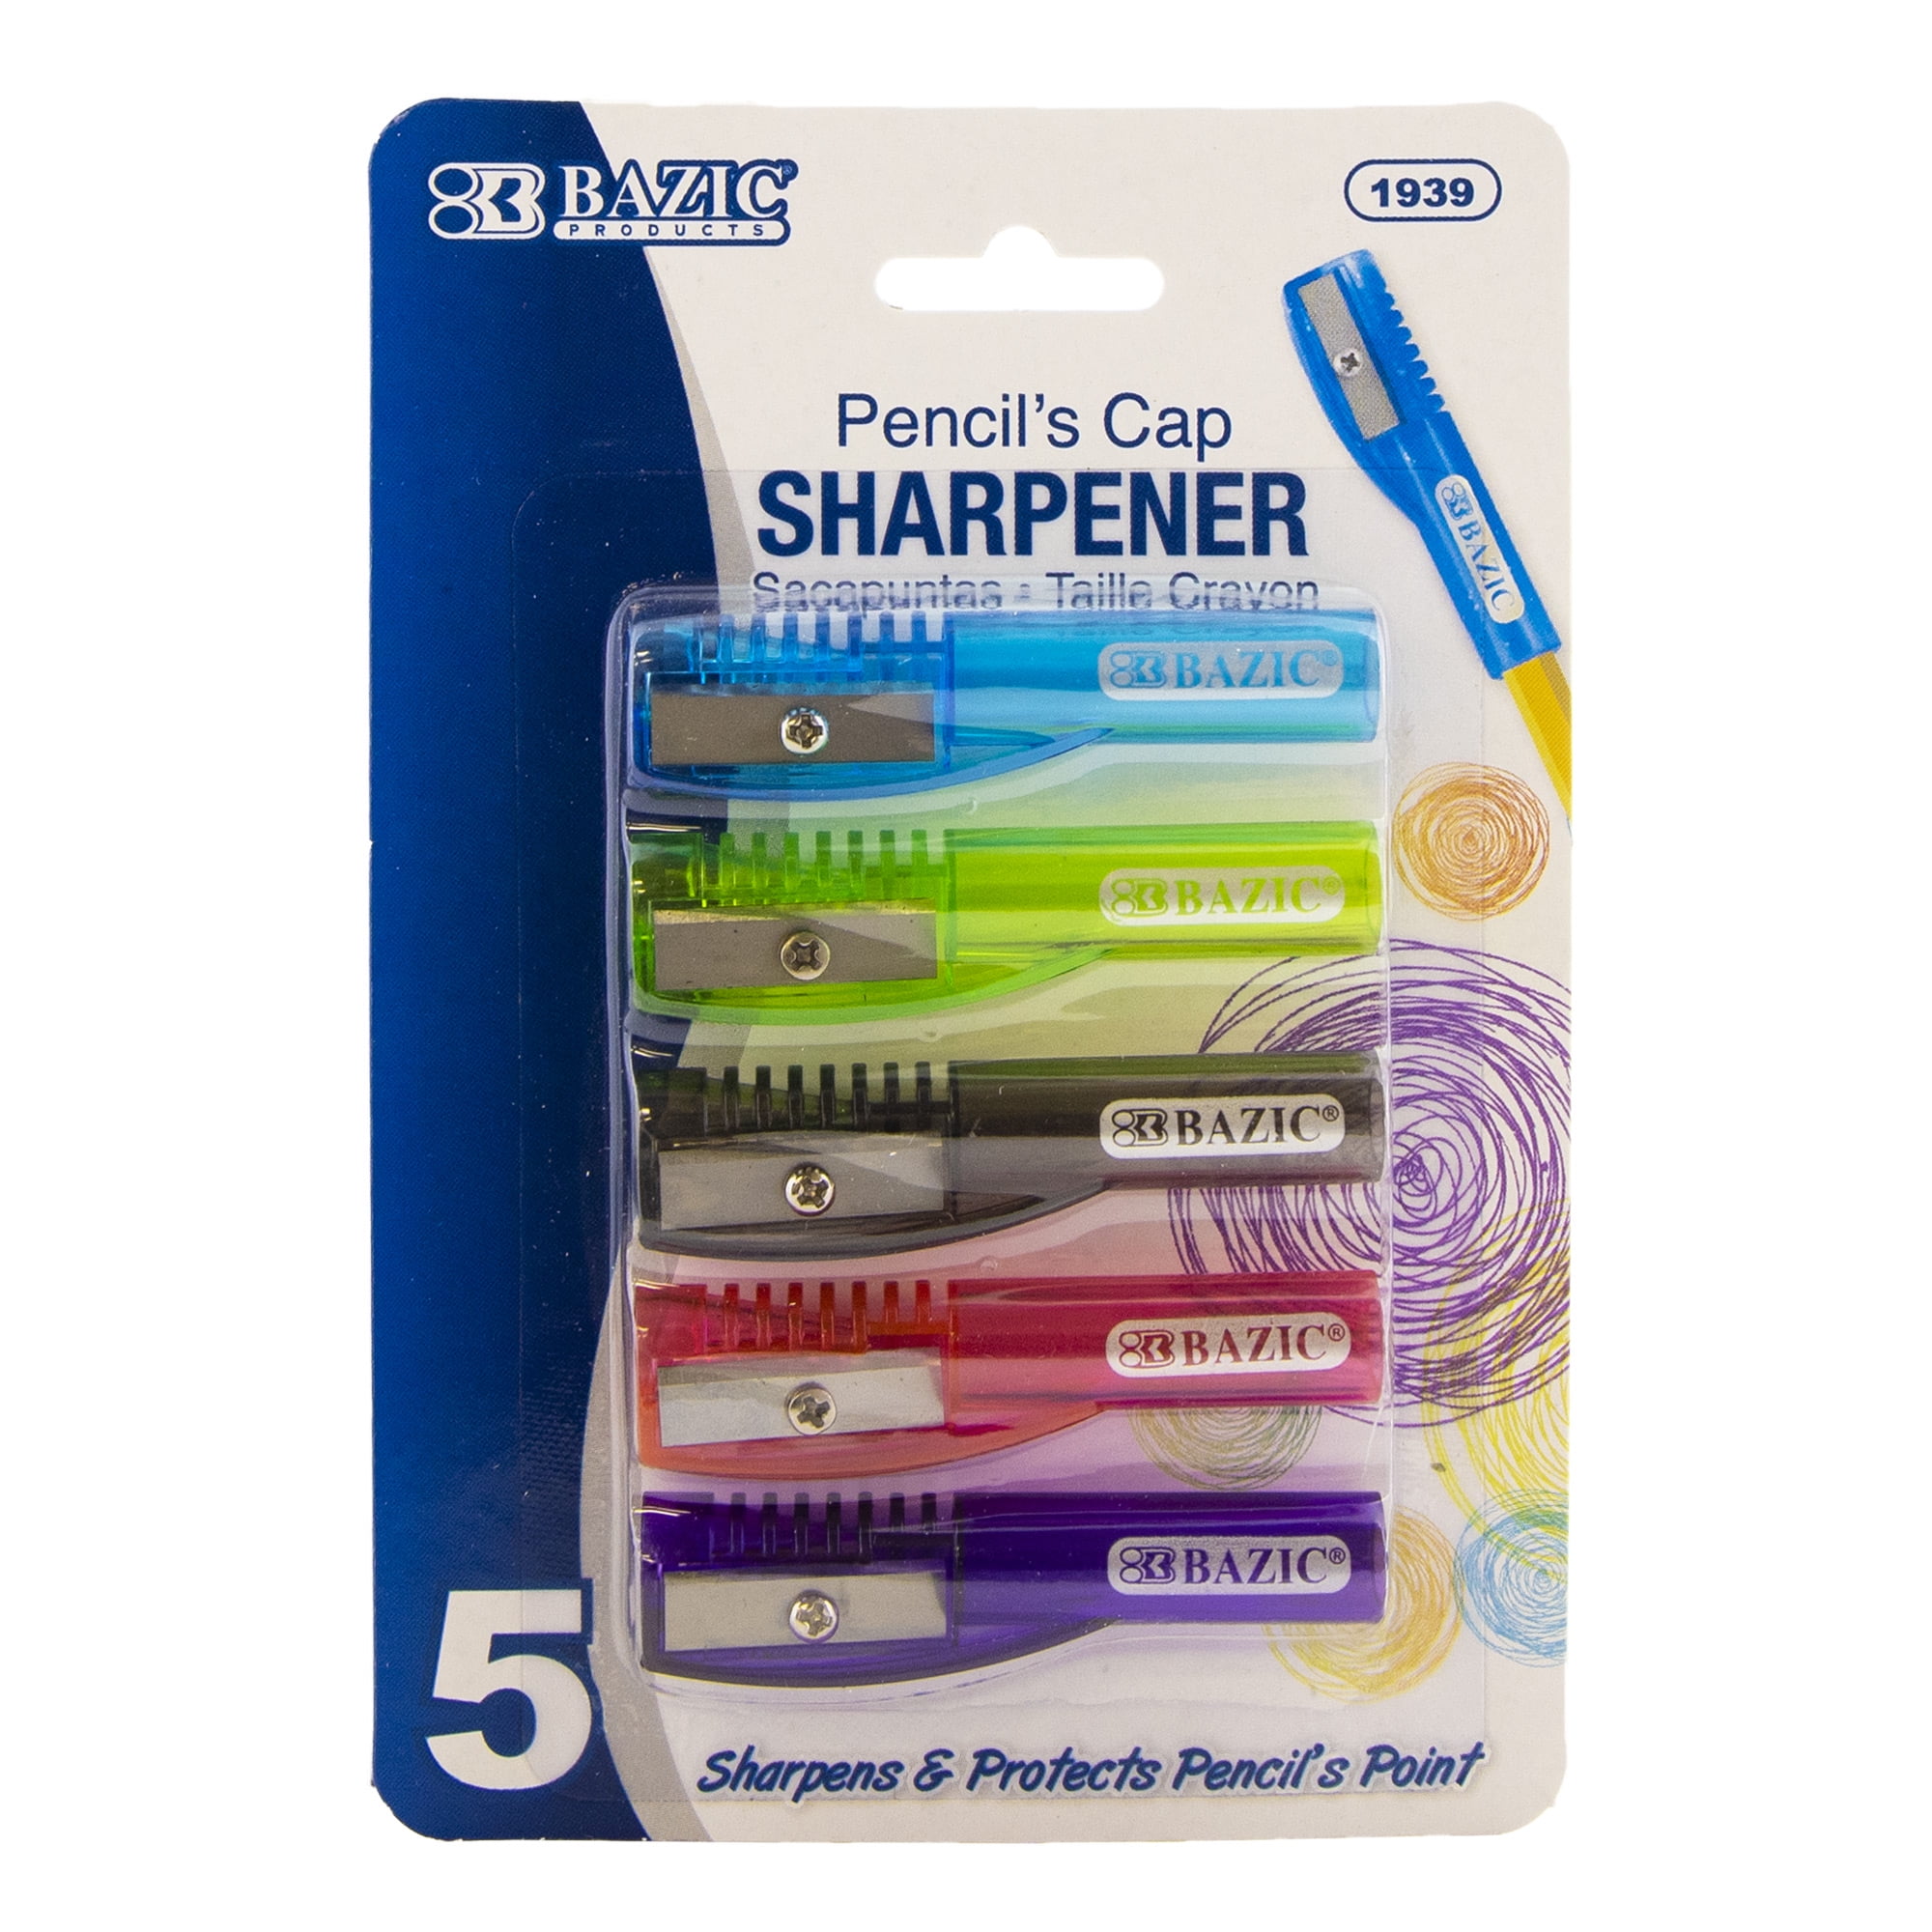 One-Hole Manual Pencil Sharpeners, 4 X 2 X 1, Assorted Colors, 24/pack |  Bundle of 5 Packs